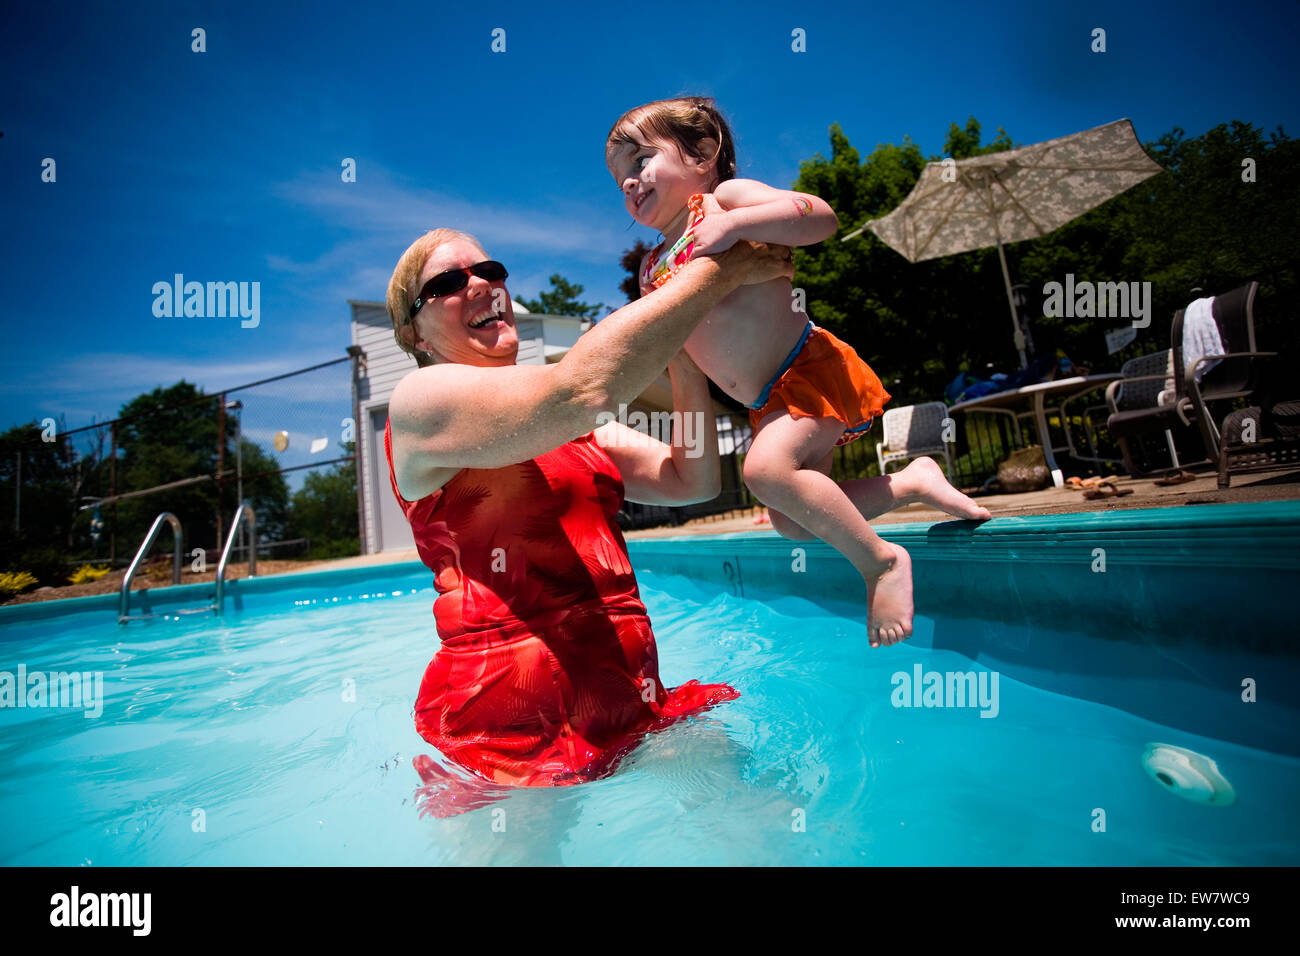 A small girl jumps into the pool. Stock Photo